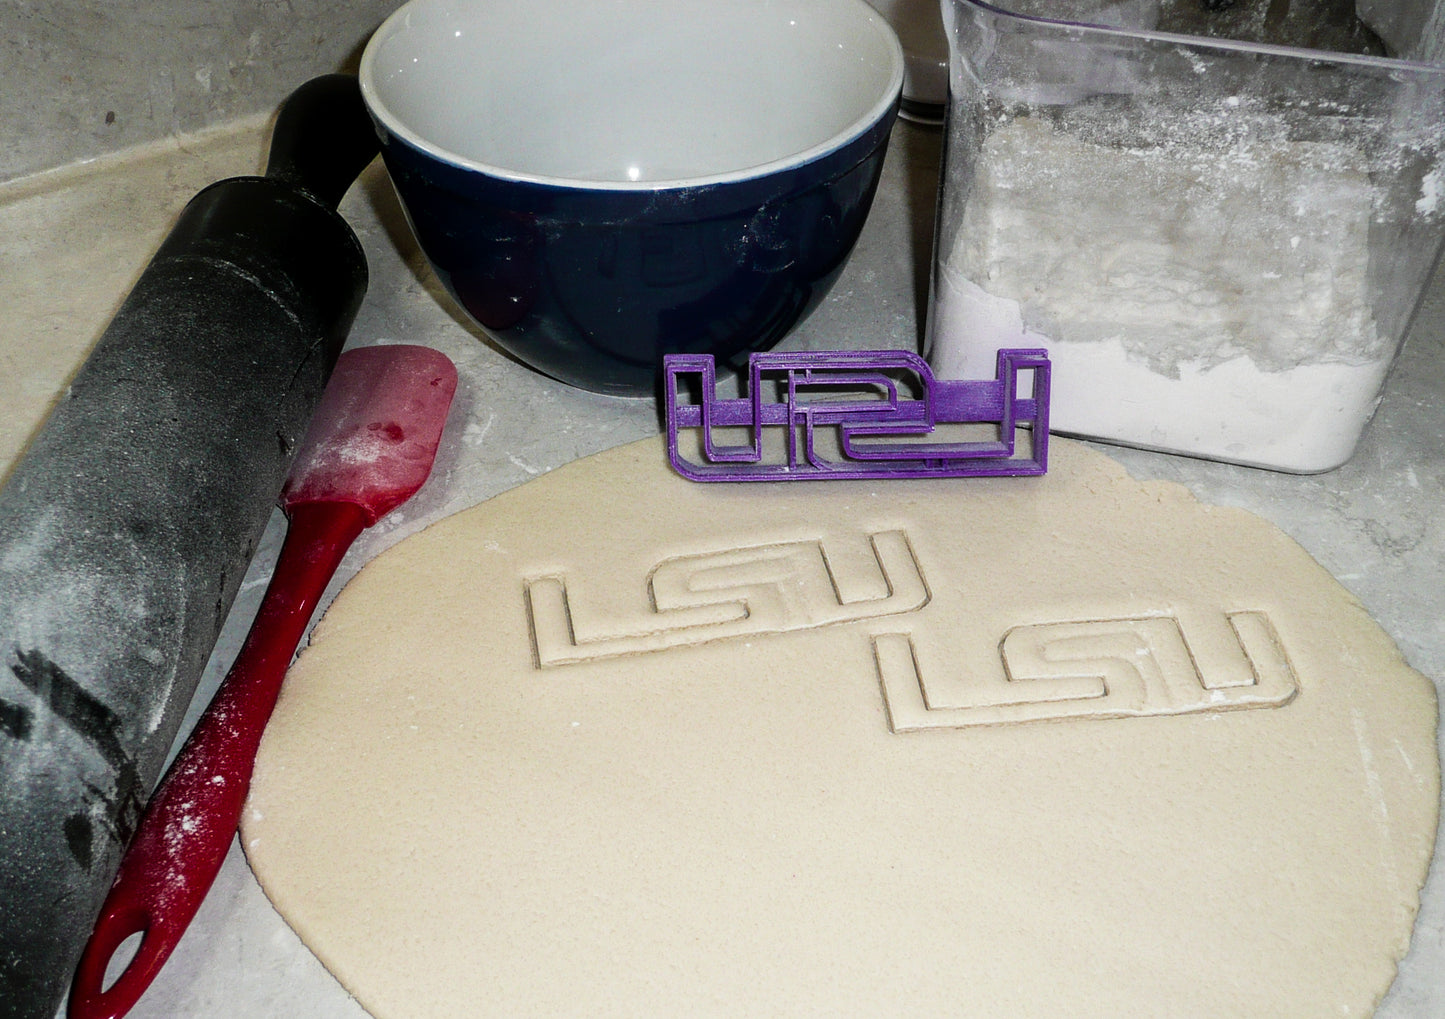 LSU Tigers Louisiana State University Football Cookie Cutter Made In USA PR940